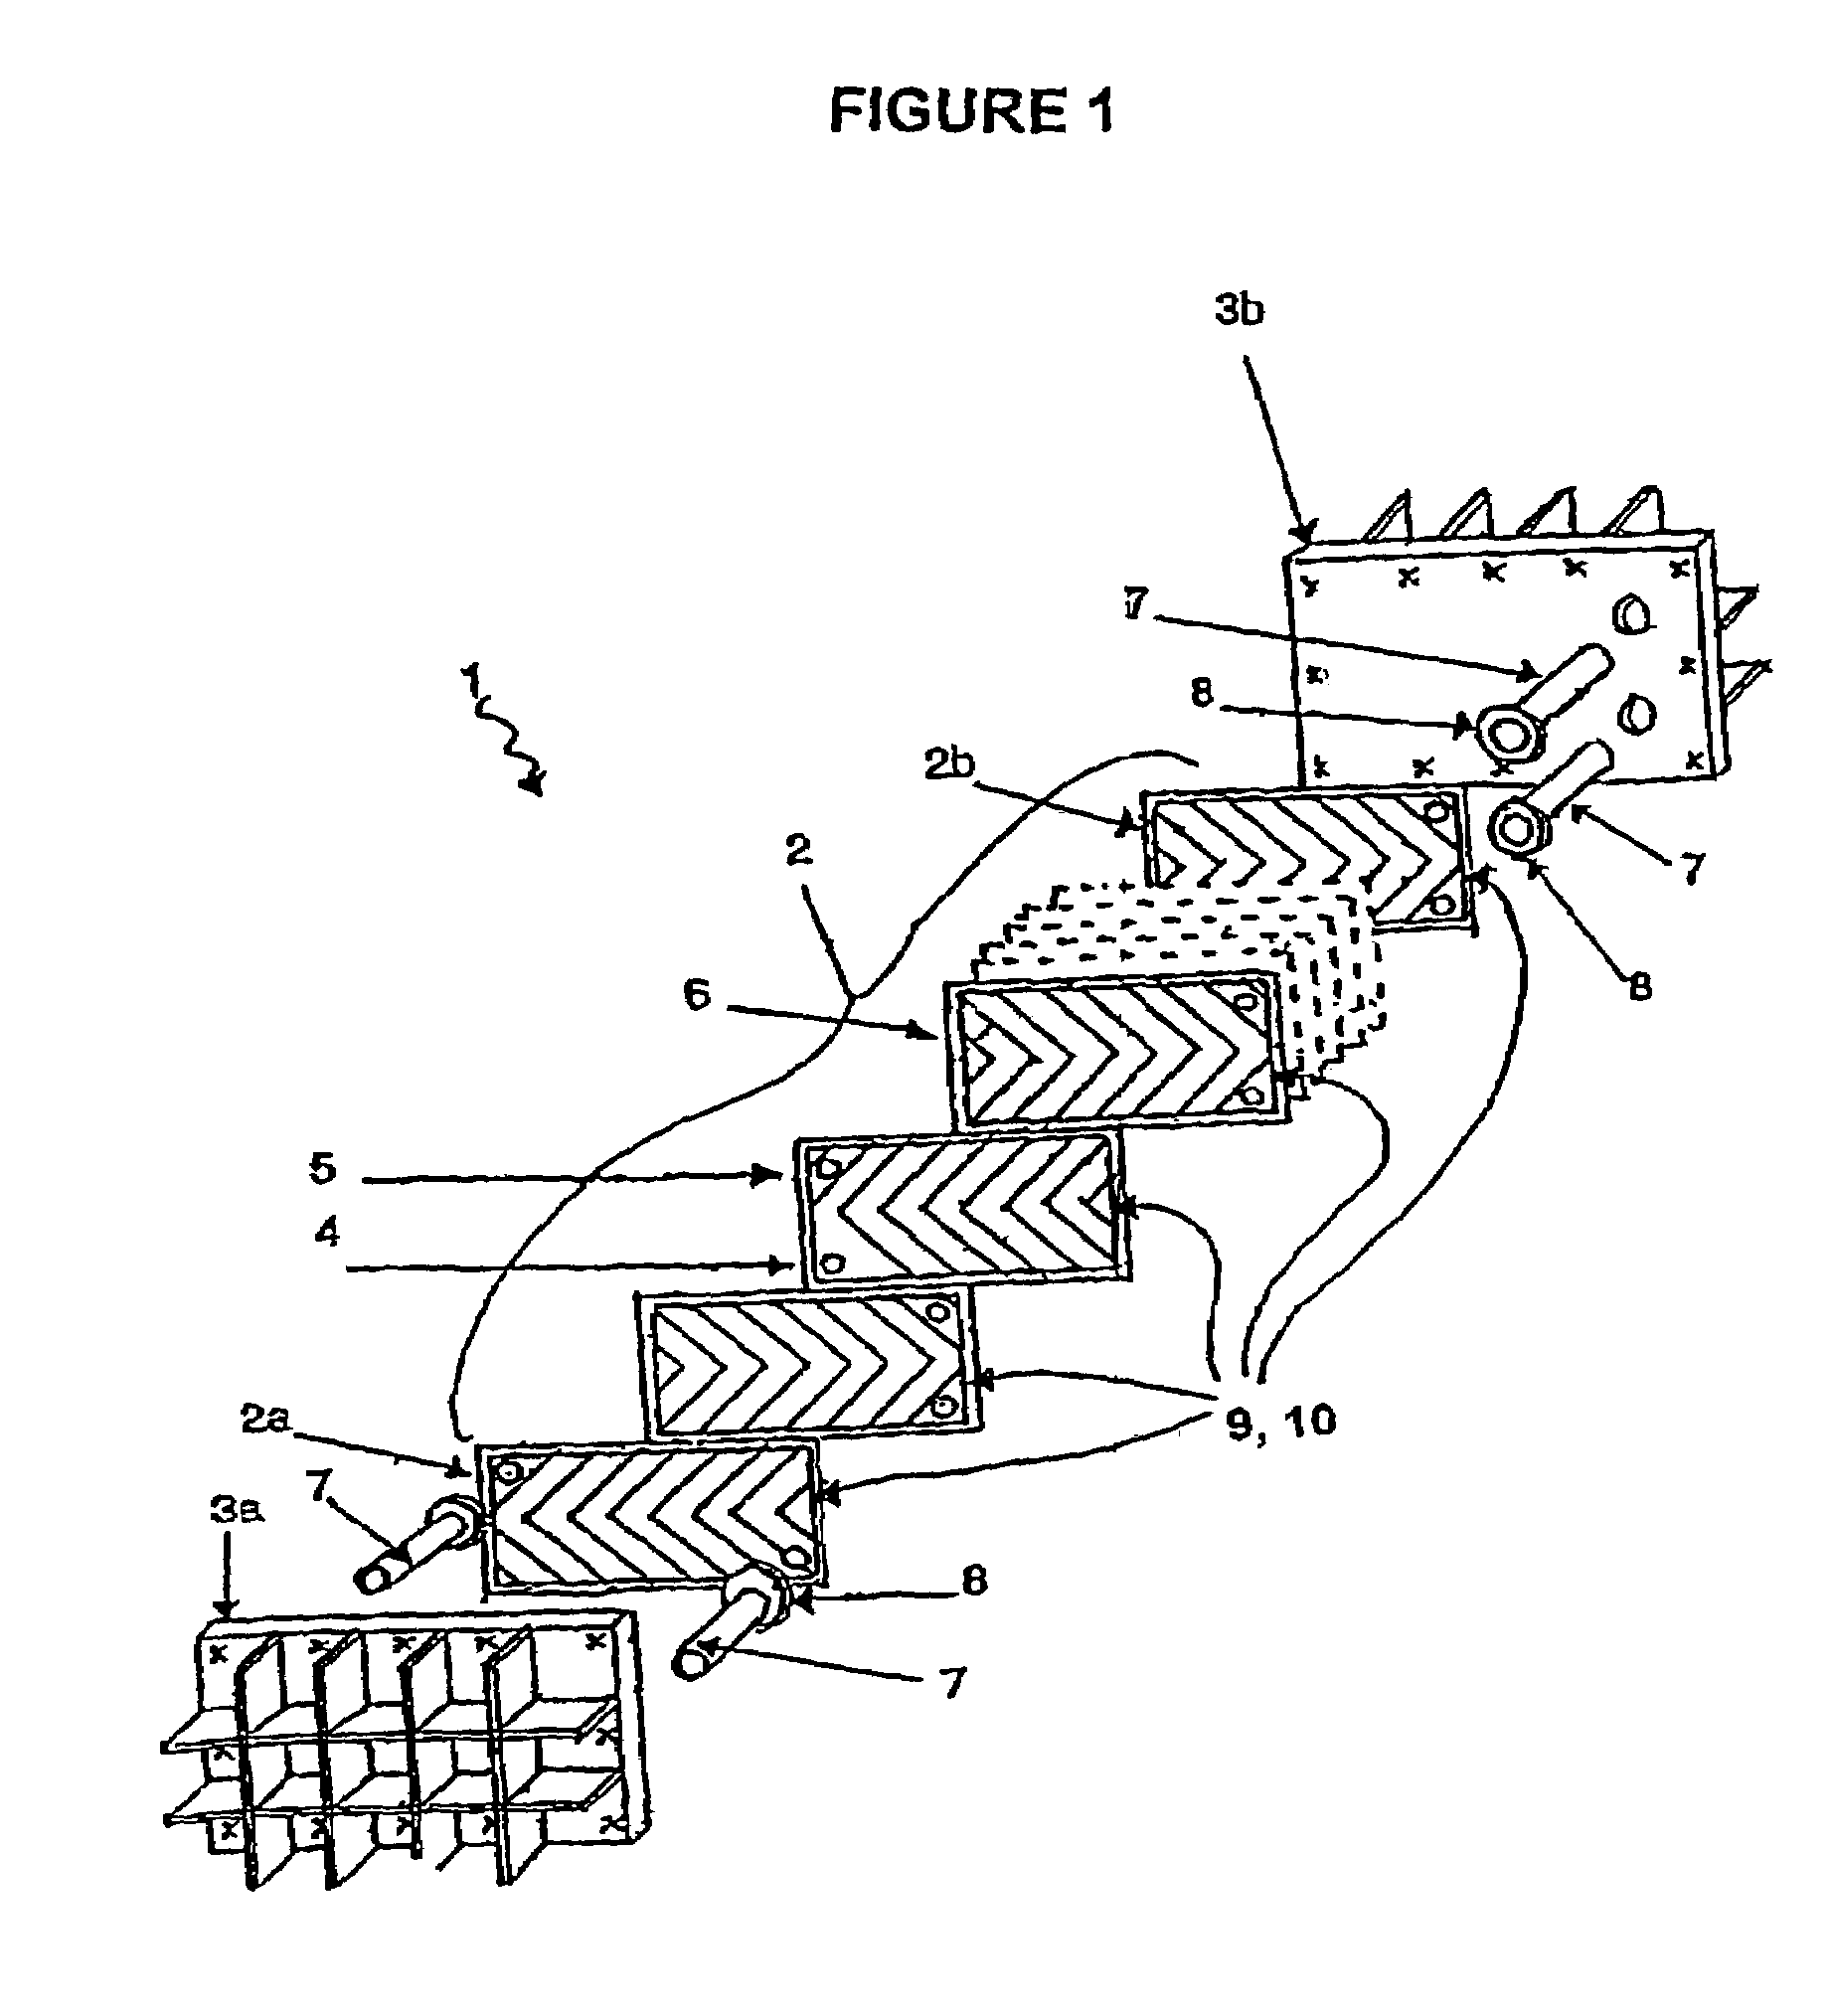 Storage vessel chamber for storing fuels such as hydrogen